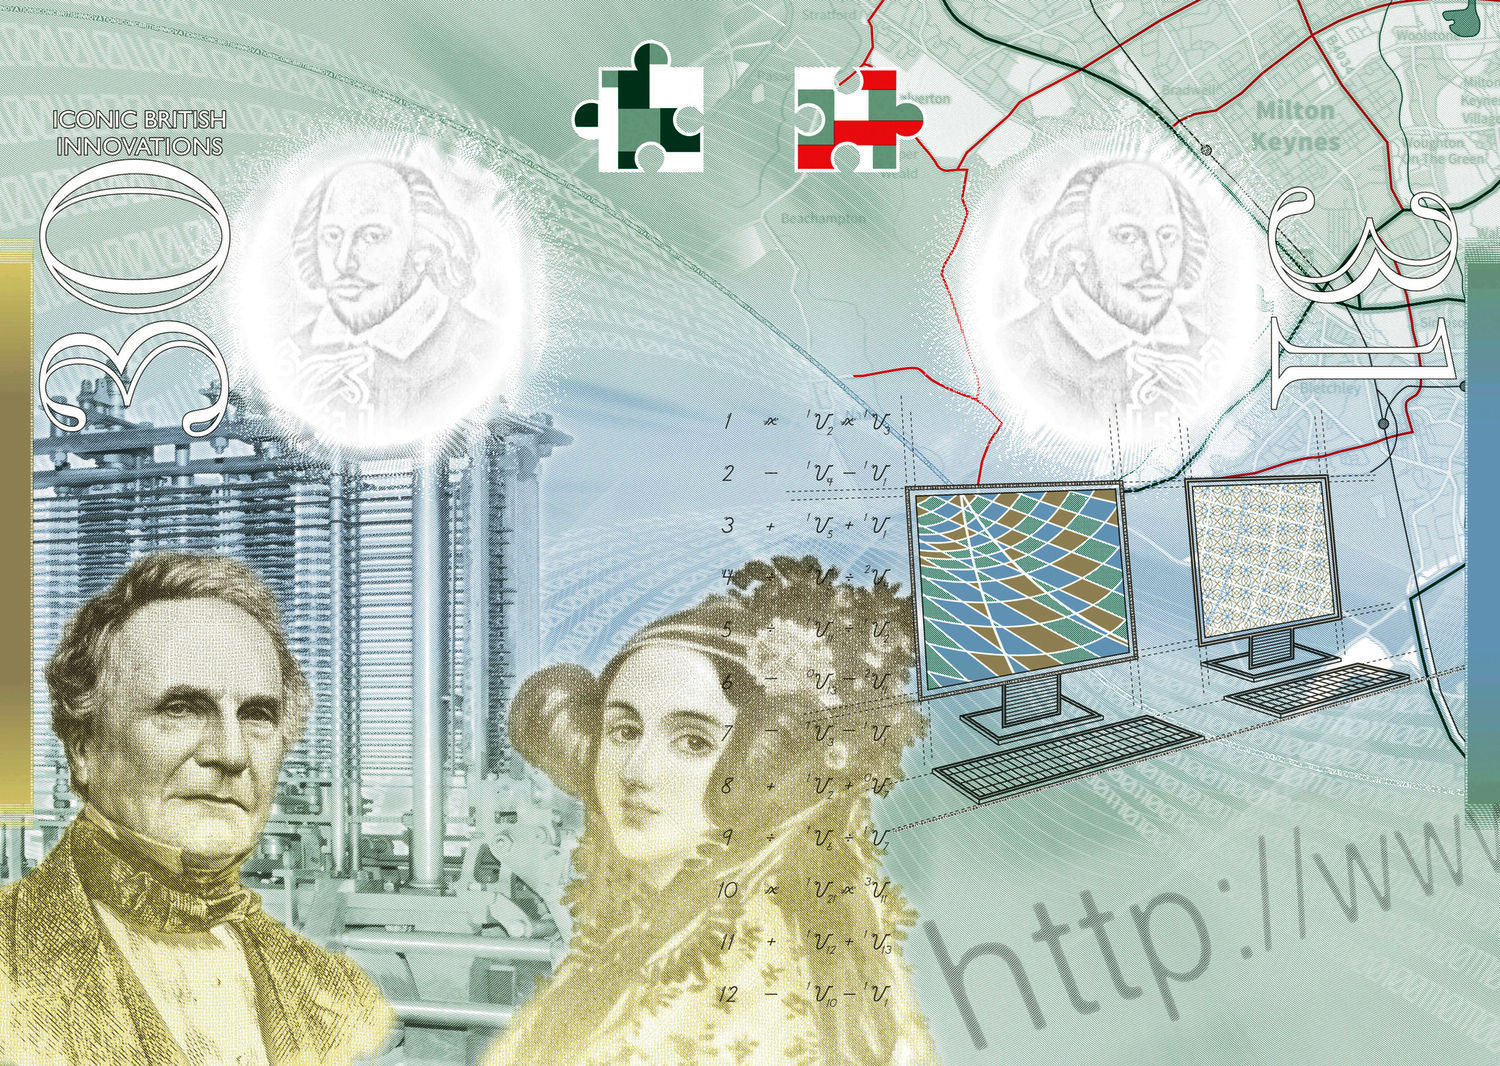 Two pages (featuring Charles Babbage and Ada Lovelace - Iconic Innovations) from the new British passport design that have been unveiled at Shakespeare's Globe Theatre in London